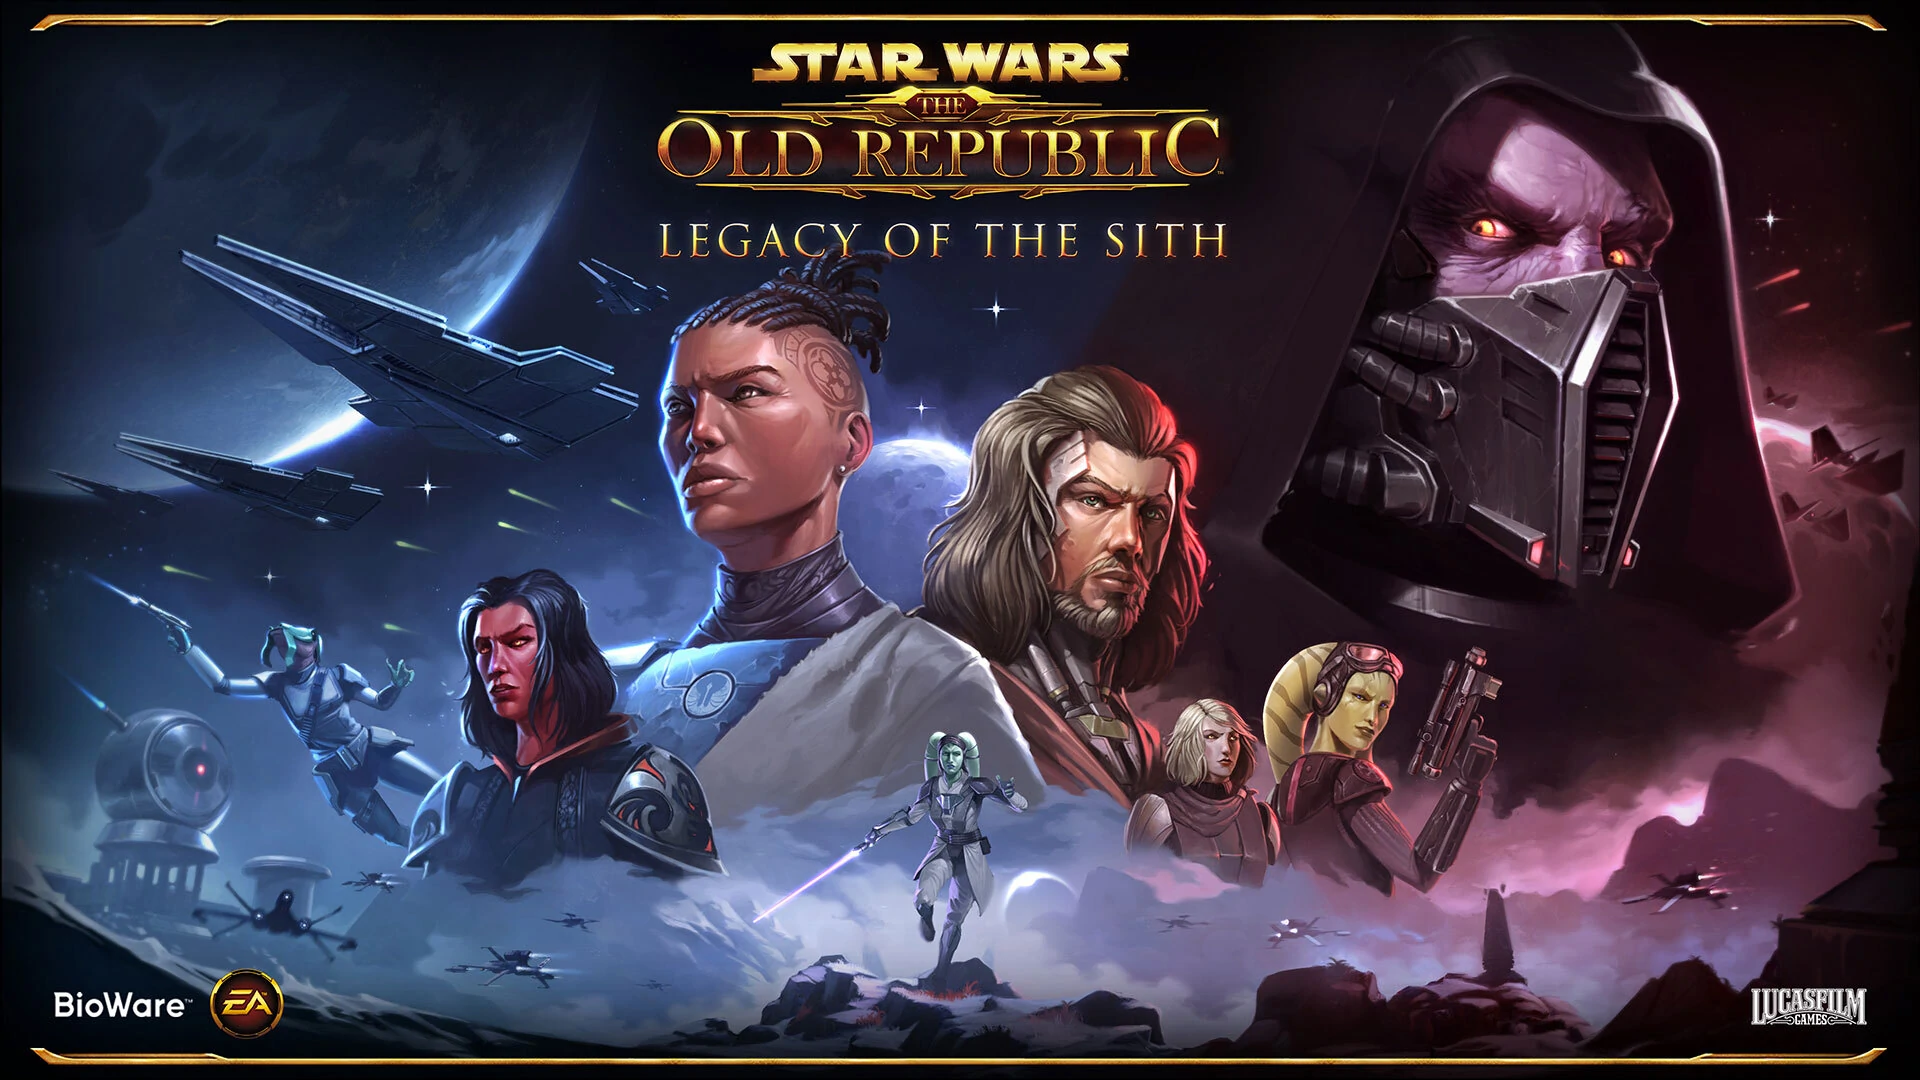 Star Wars: The Old Republic's Legacy of the Sith Expansion Goes Live 11